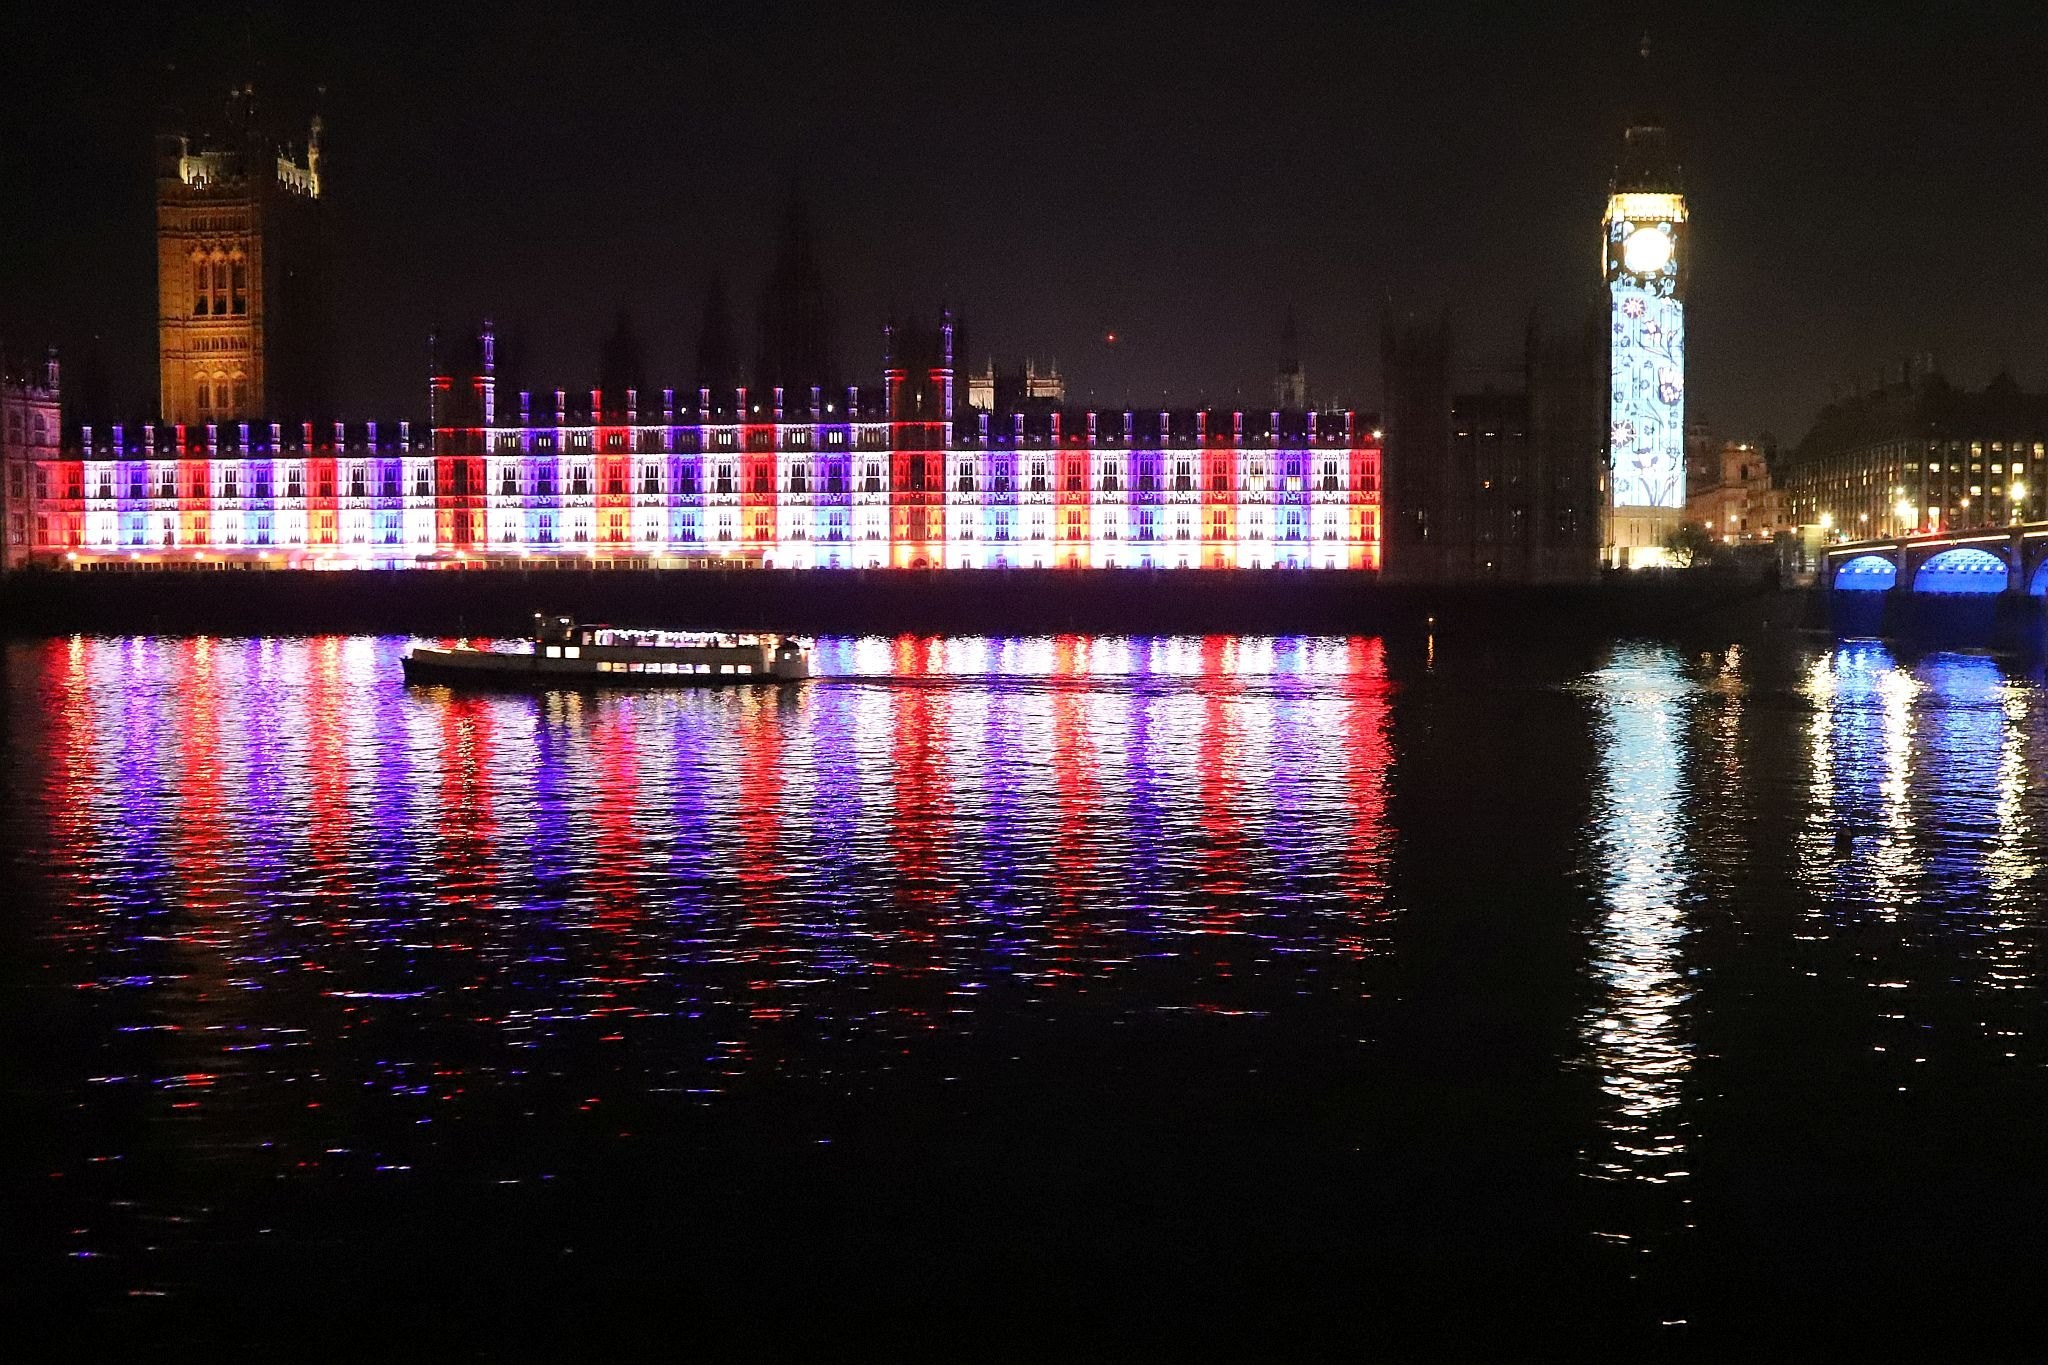 The Houses of Parliament lit red, white and blue to mark the Coronation of King Charles III and Queen Camilla. Photo taken 07-May-2023. London.